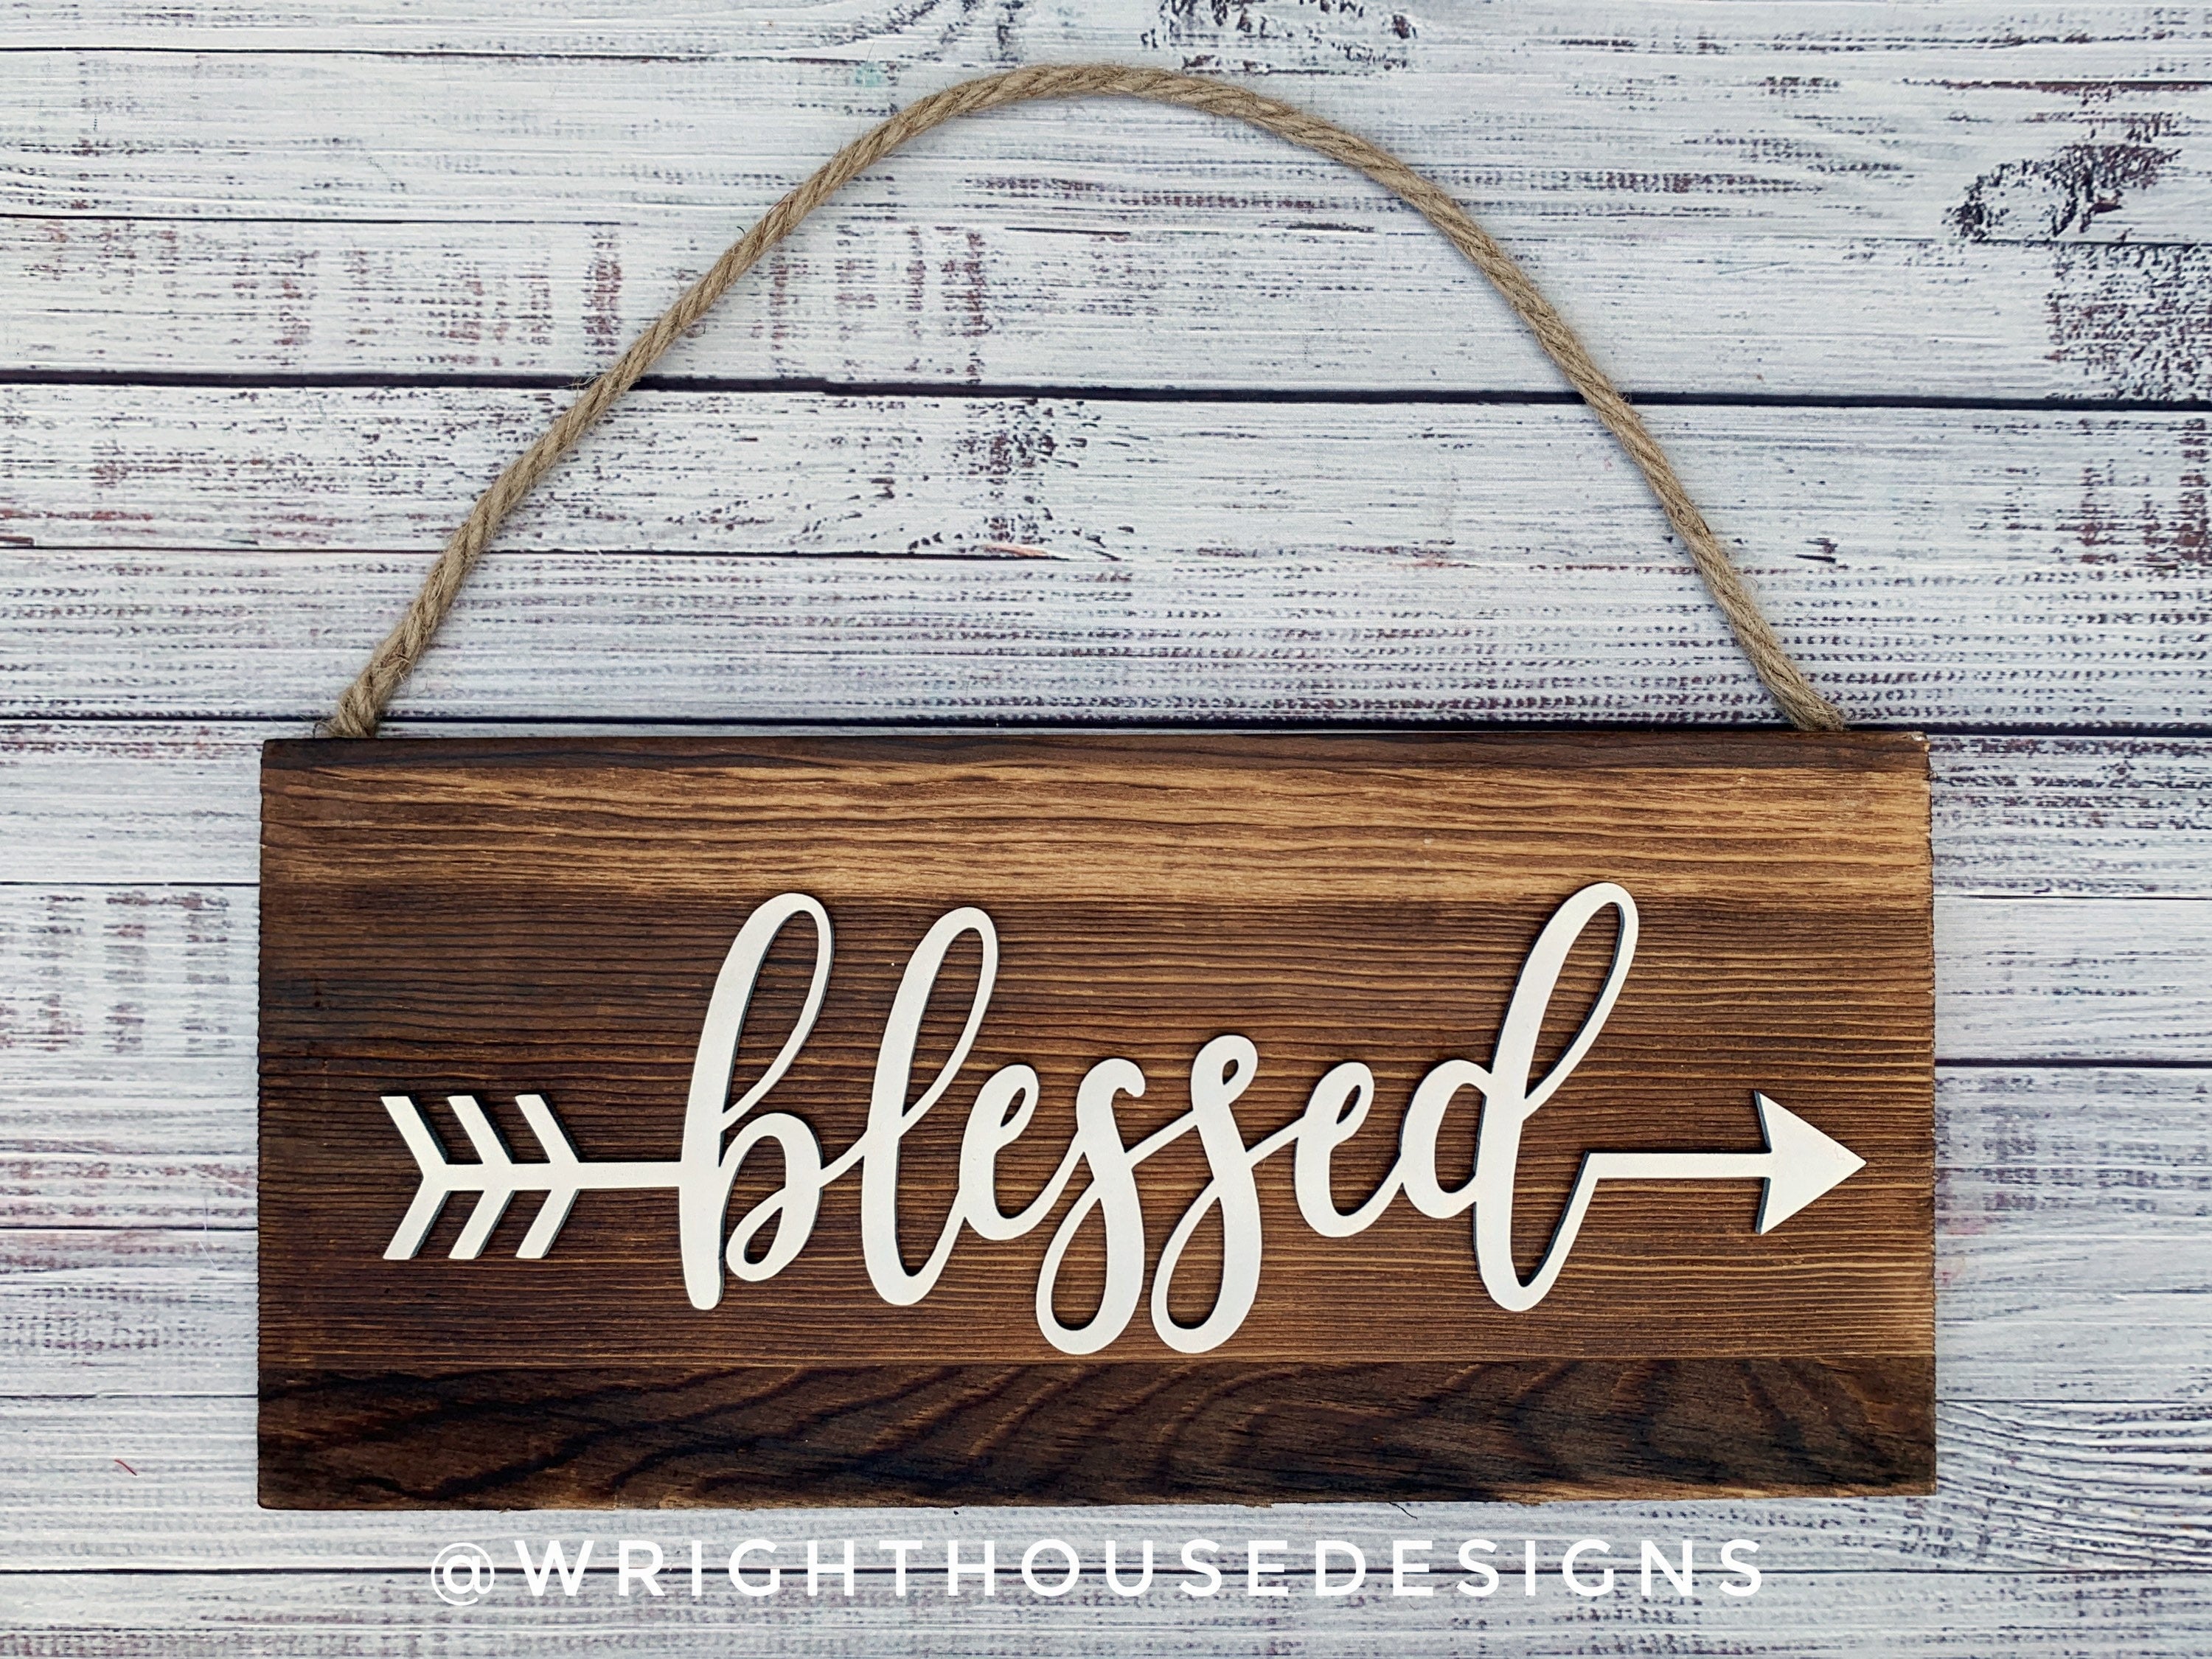 Blessed Arrow Word Art - Rustic Farmhouse - Reclaimed Pallet Plank Board Sign - Wooden Wall Art - Bookshelf Decor and She Shed Signs